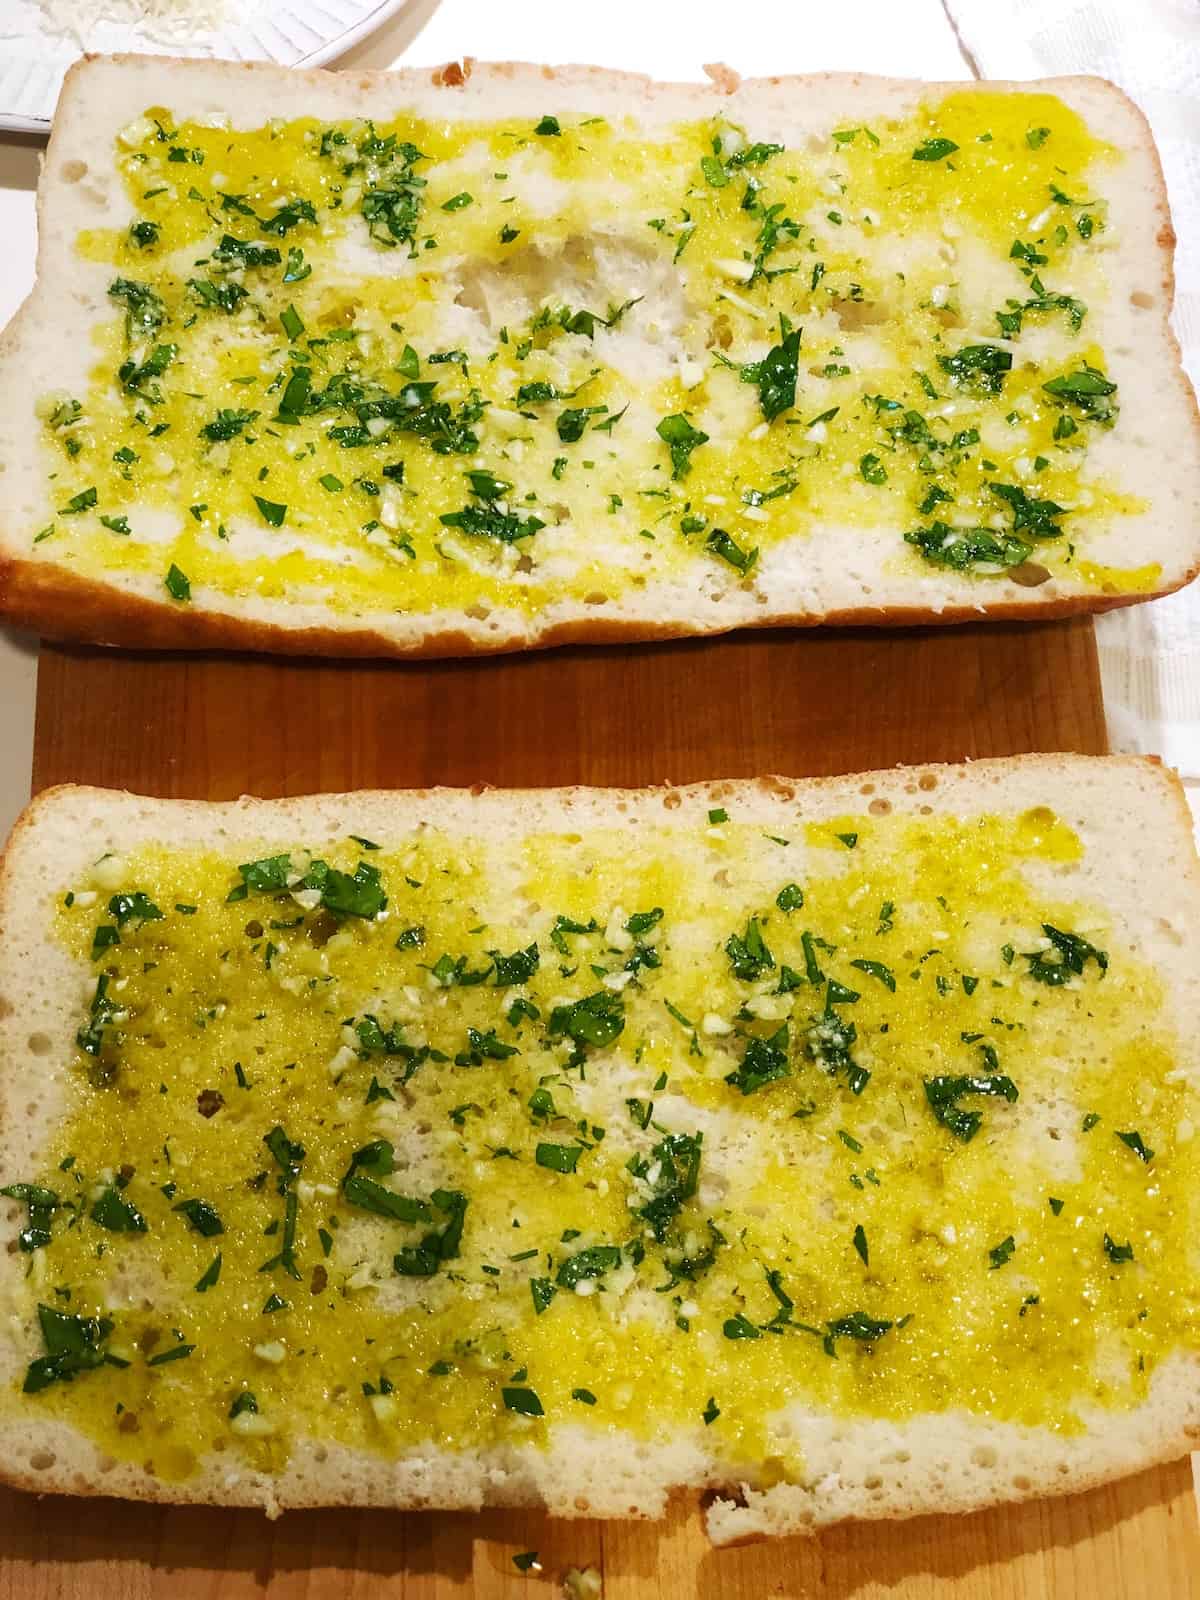 garlic ciabatta with olive oil brushed over the top